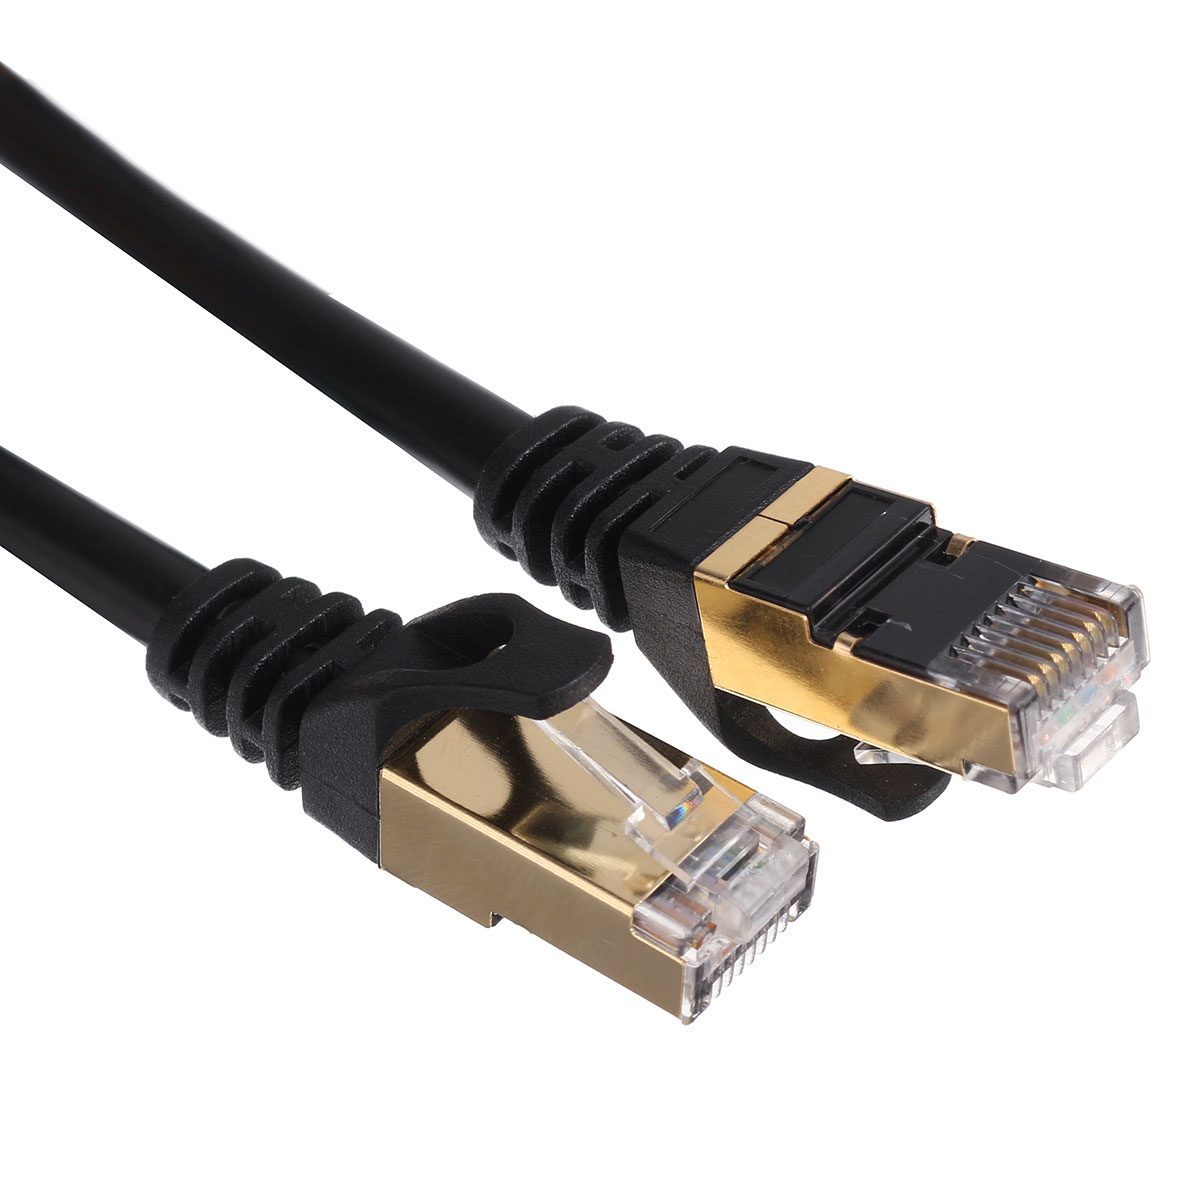 Black-Cat7-28AWG-High-Speed-Pure-Copper-Core-Networking-Cable-Cat7-Cable-LAN-Network-RJ45-Patch-Cord-1621196-5